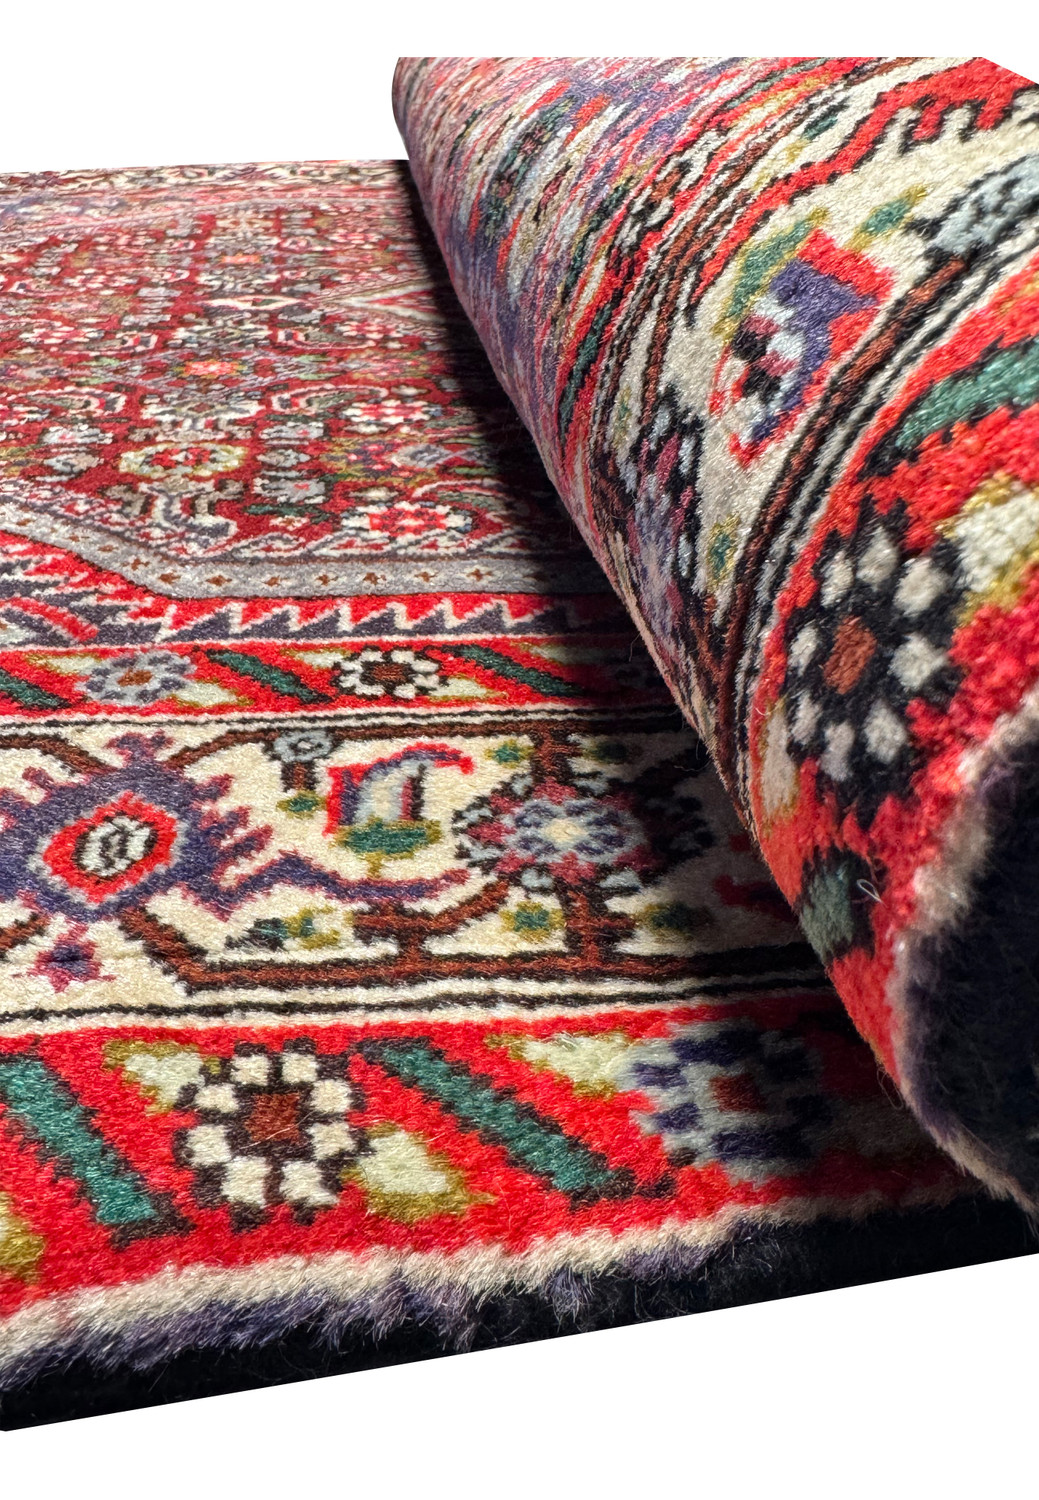 A detailed top view of a Persian Bijar rug focusing on the central medallion and complex patterns. Colors: Crimson red, navy blue, ivory, beige, forest green, light blue, orange, pink, black.